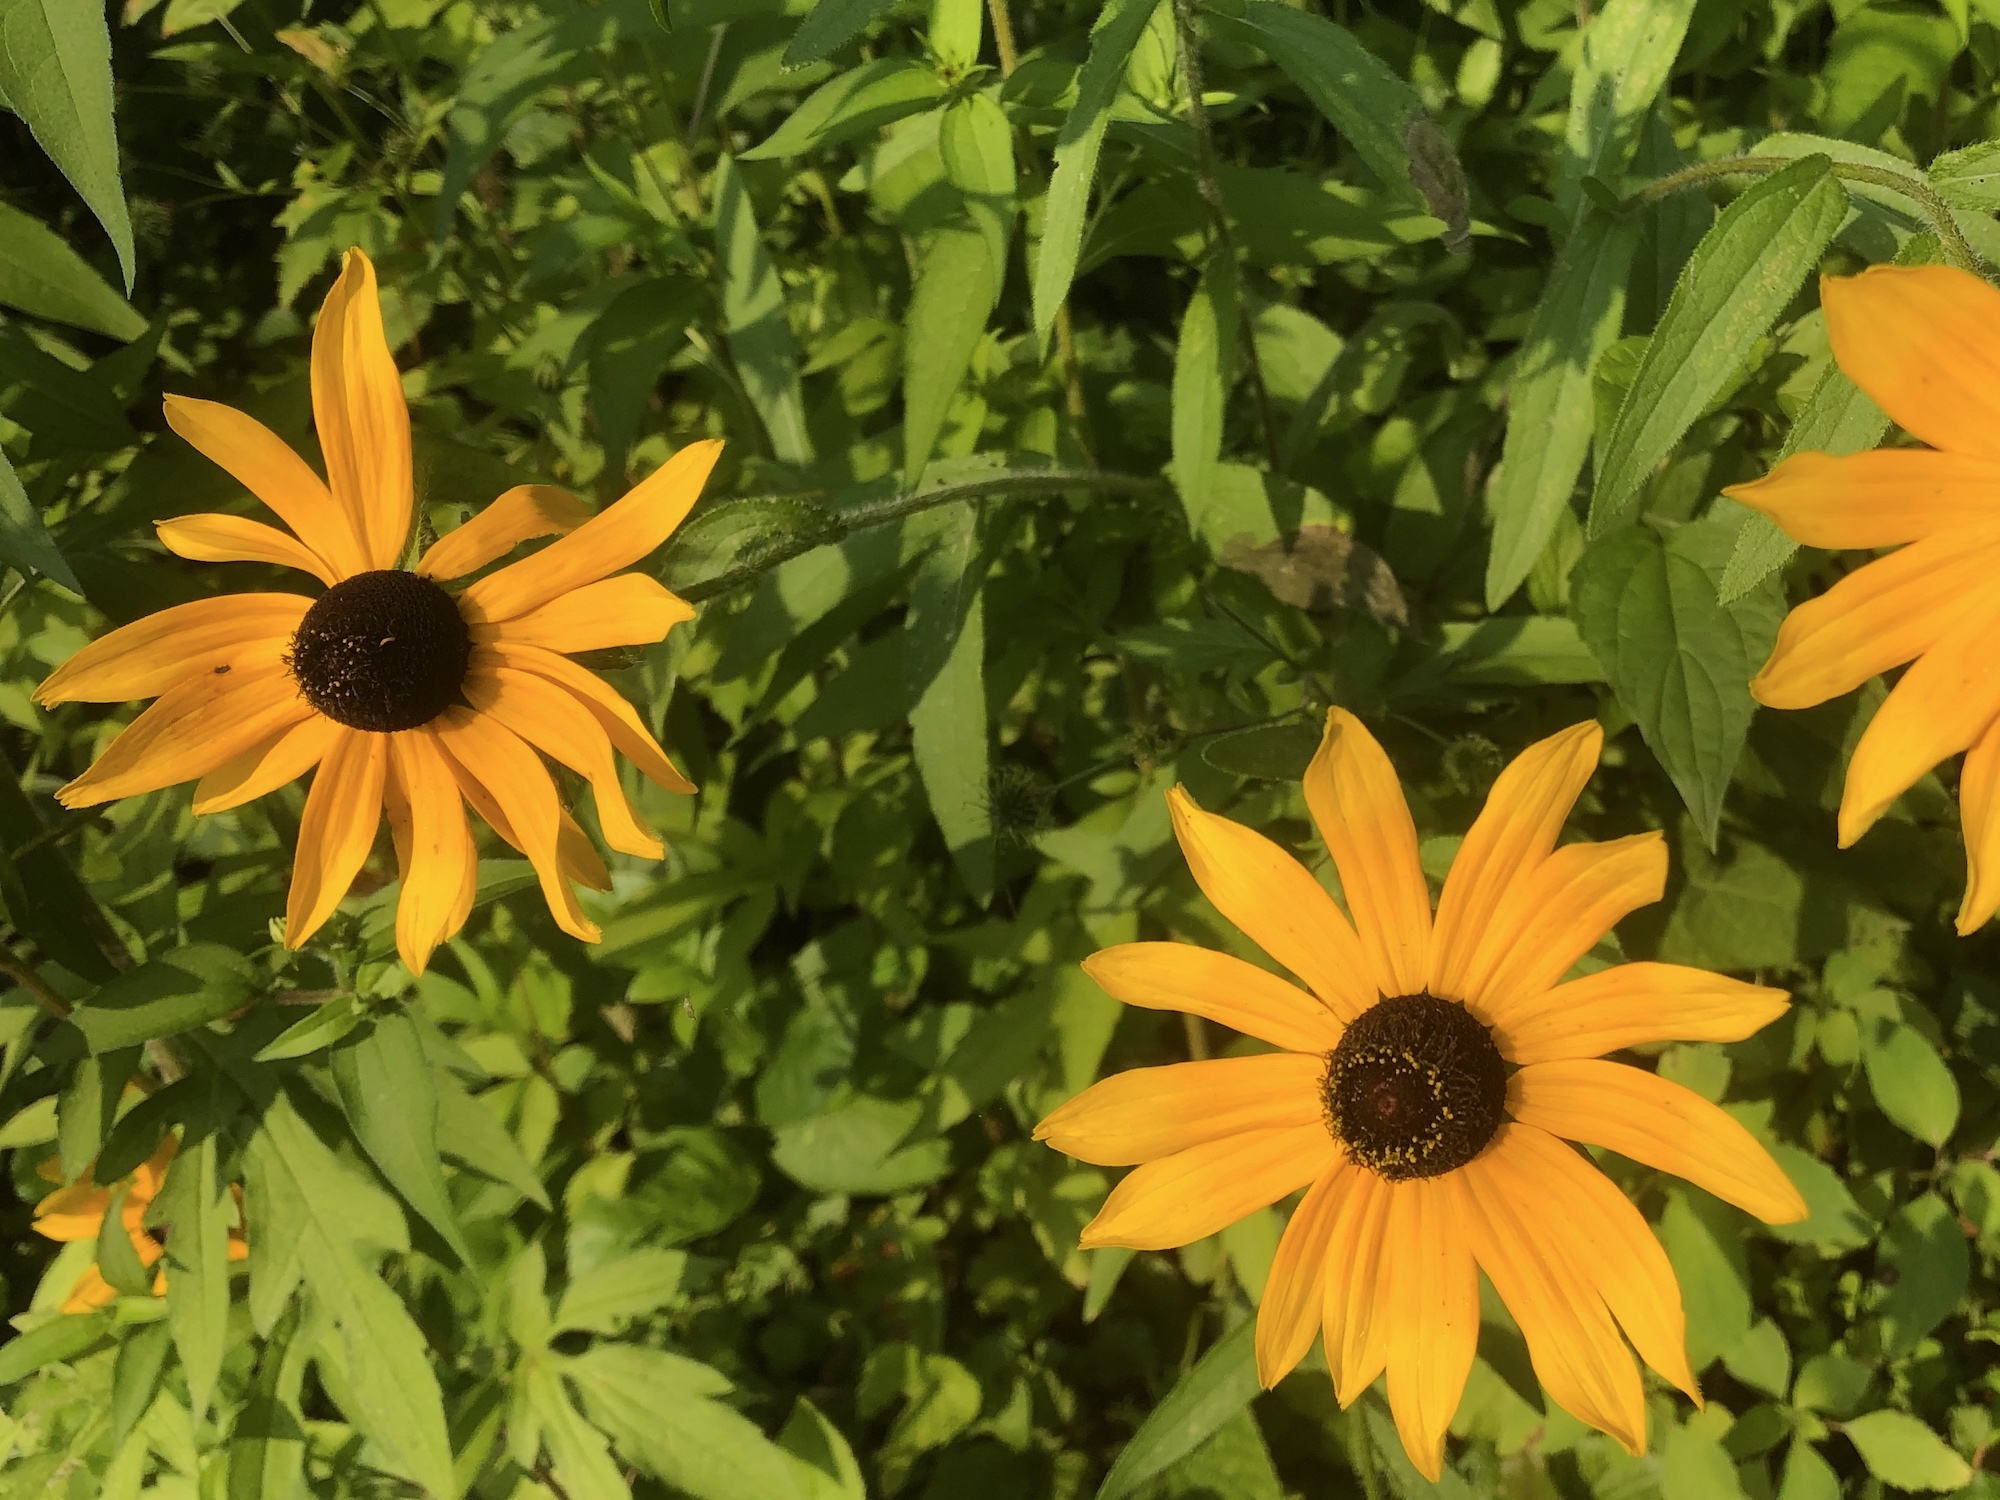 Black-eyed Susan on banks of Marion Dunn Pond in Madison, Wisconsin on July 24, 2019.